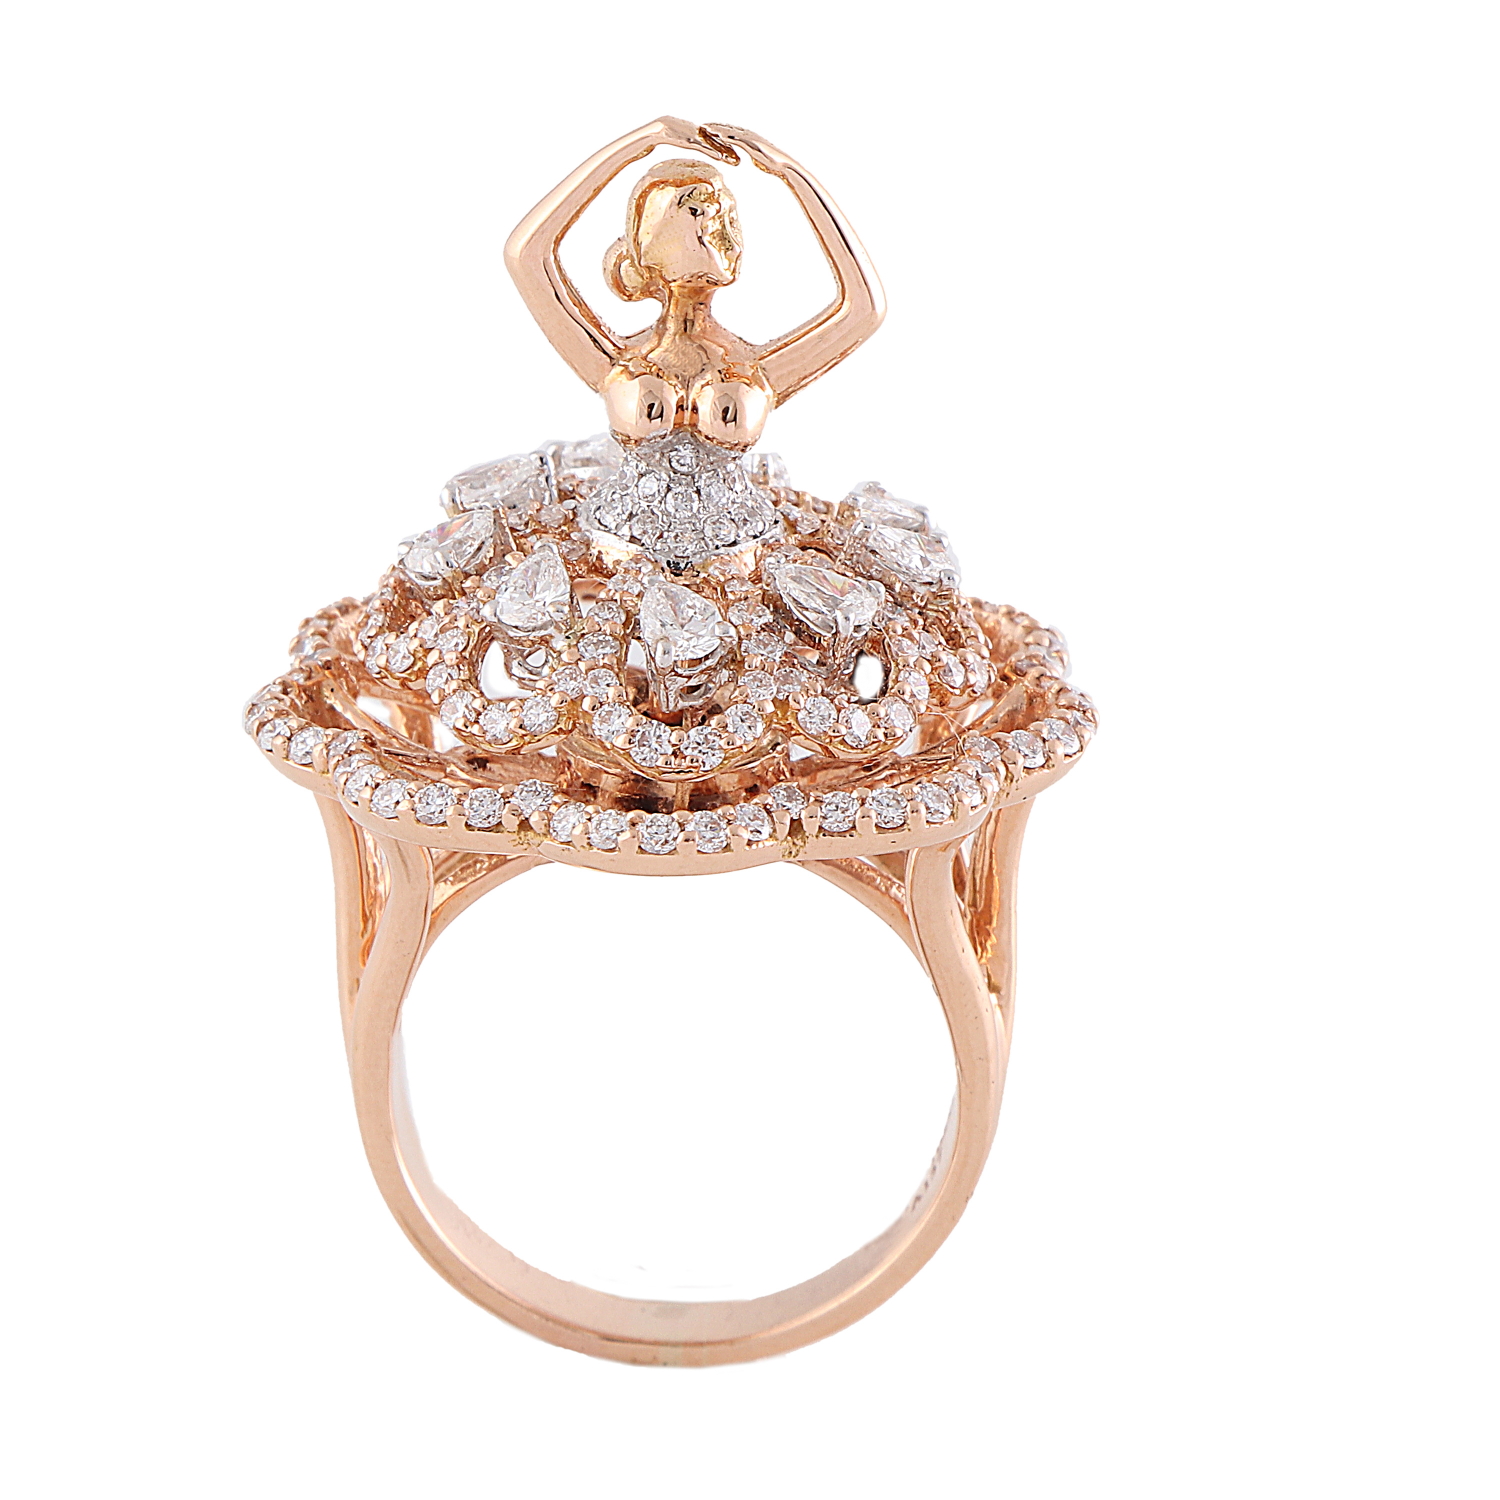 Buy Simple Heart Shaped Rose Gold Diamond Ring Online – The Jewelbox